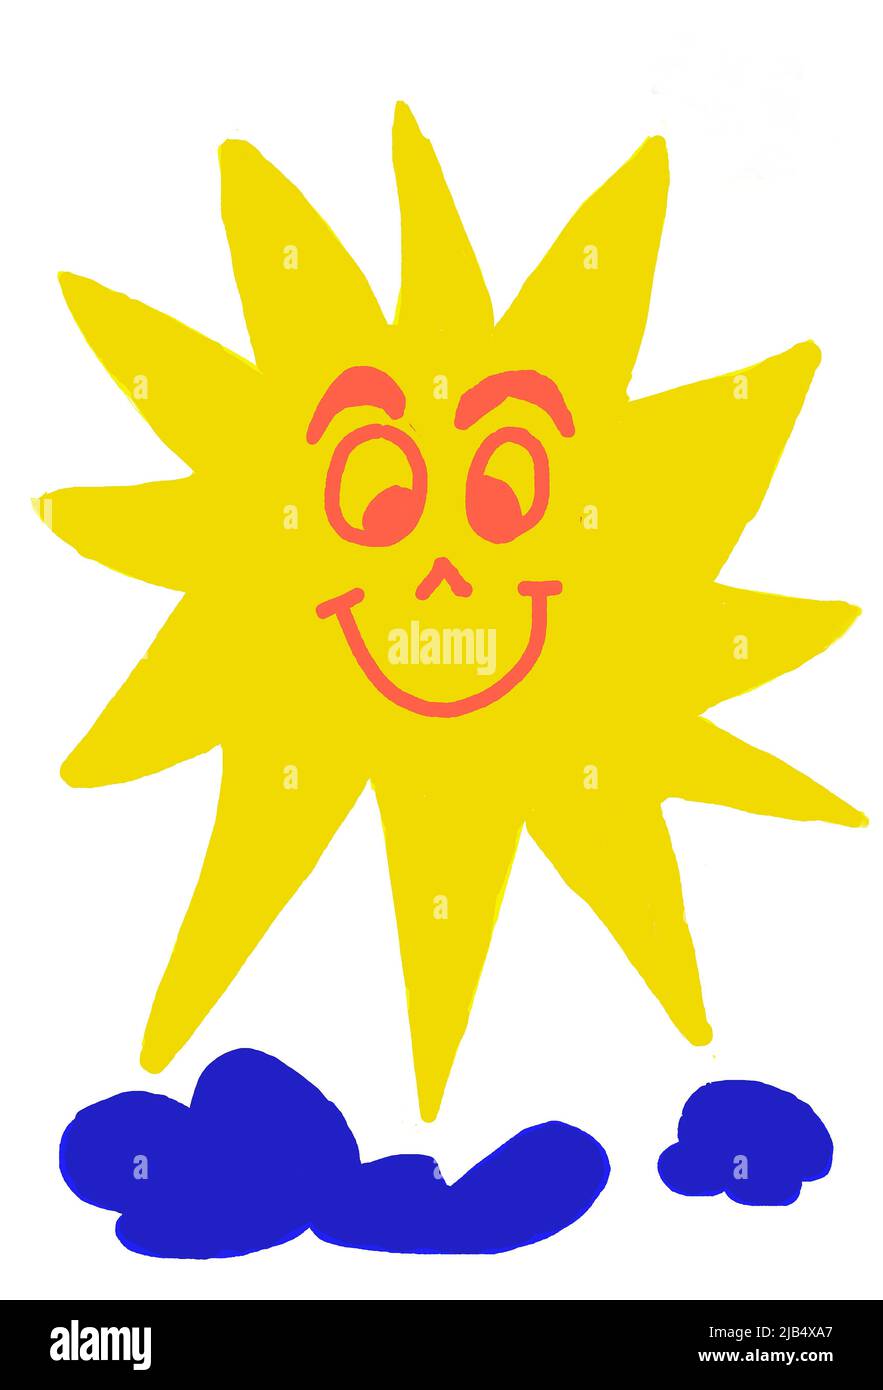 Illustration, Children drawing, Laughing sun with clouds Stock Photo